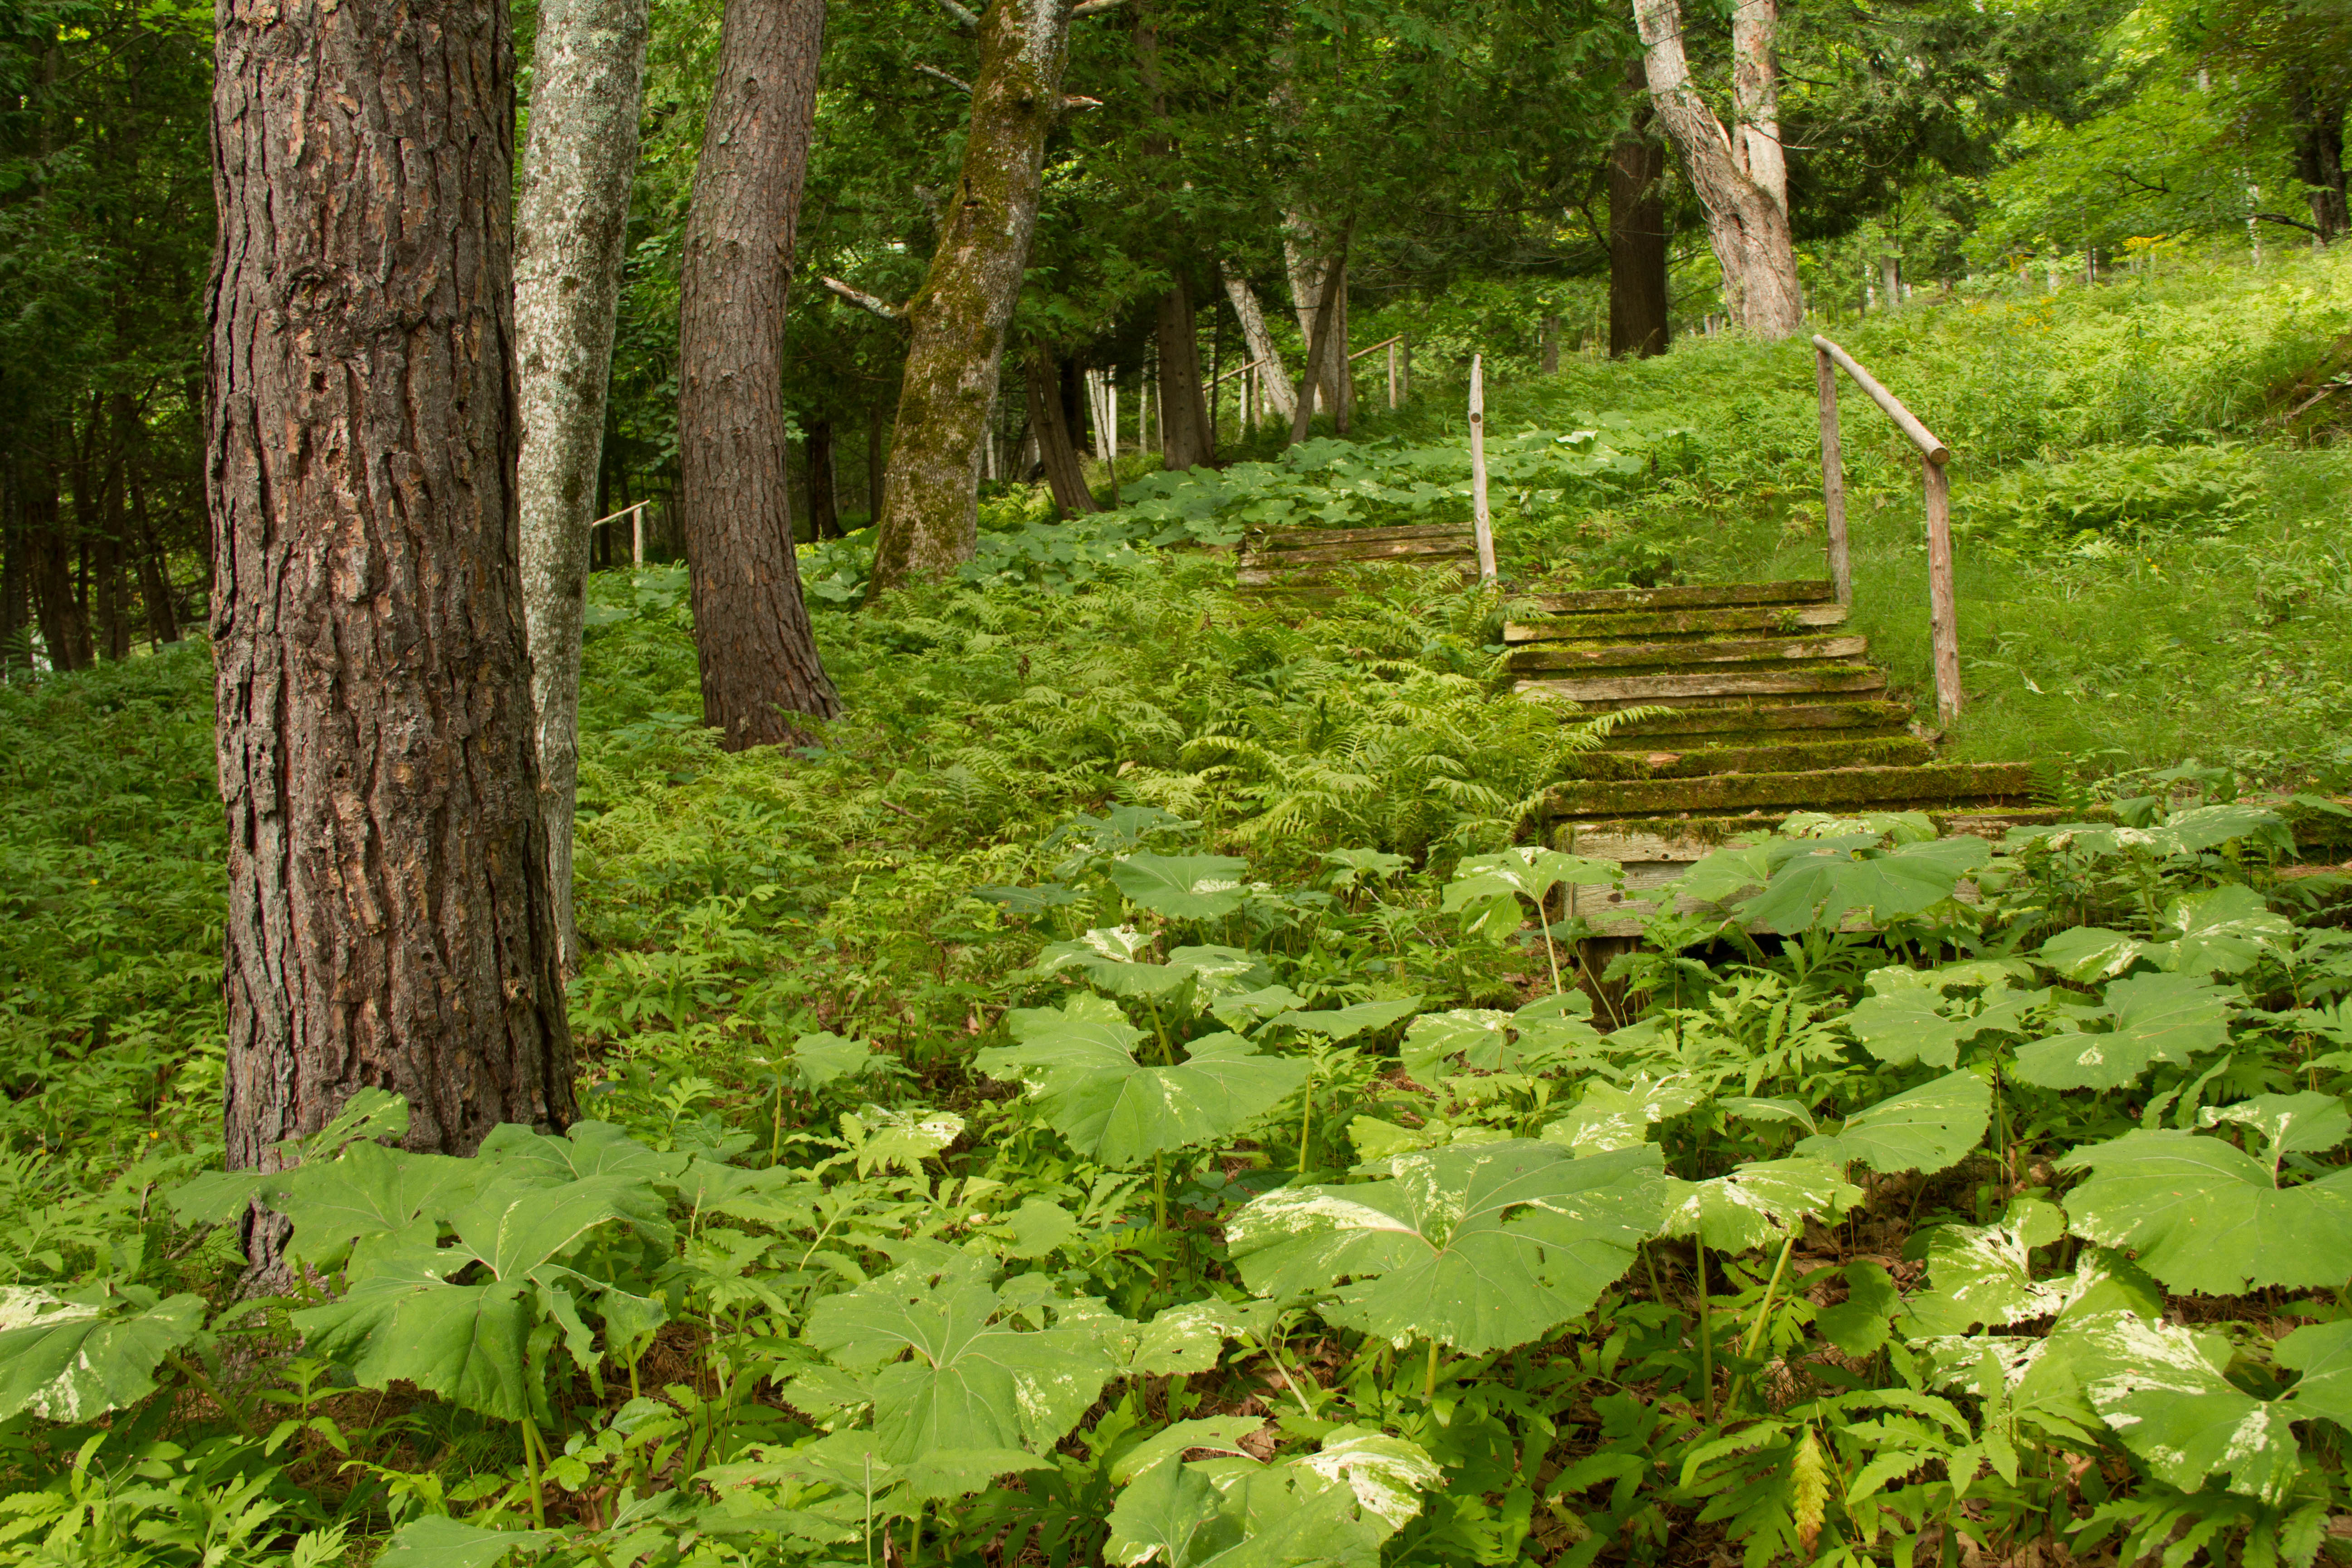 A variegated Petasites lines these steps through a section of woods.